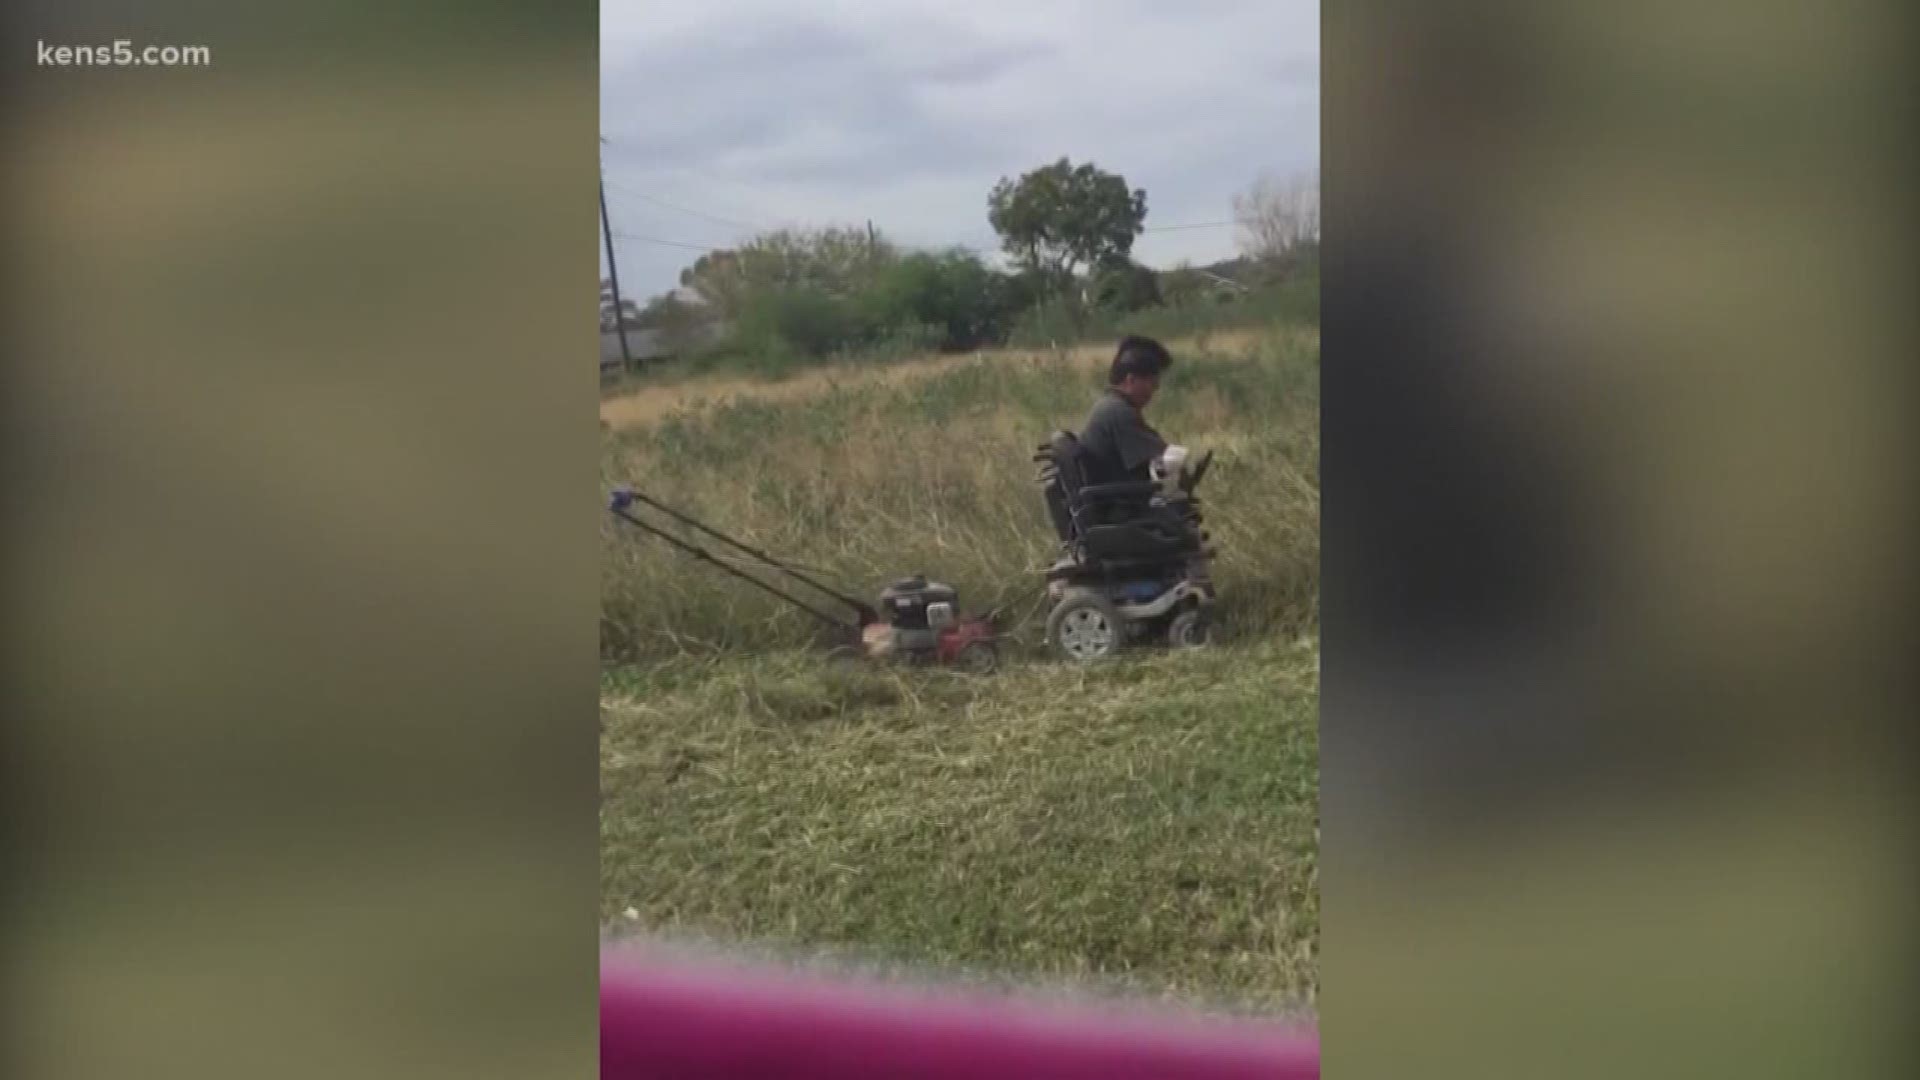 A 45-year-old South Texas veteran who's lost all of his limbs is inspiring others simply by mowing his lawn.